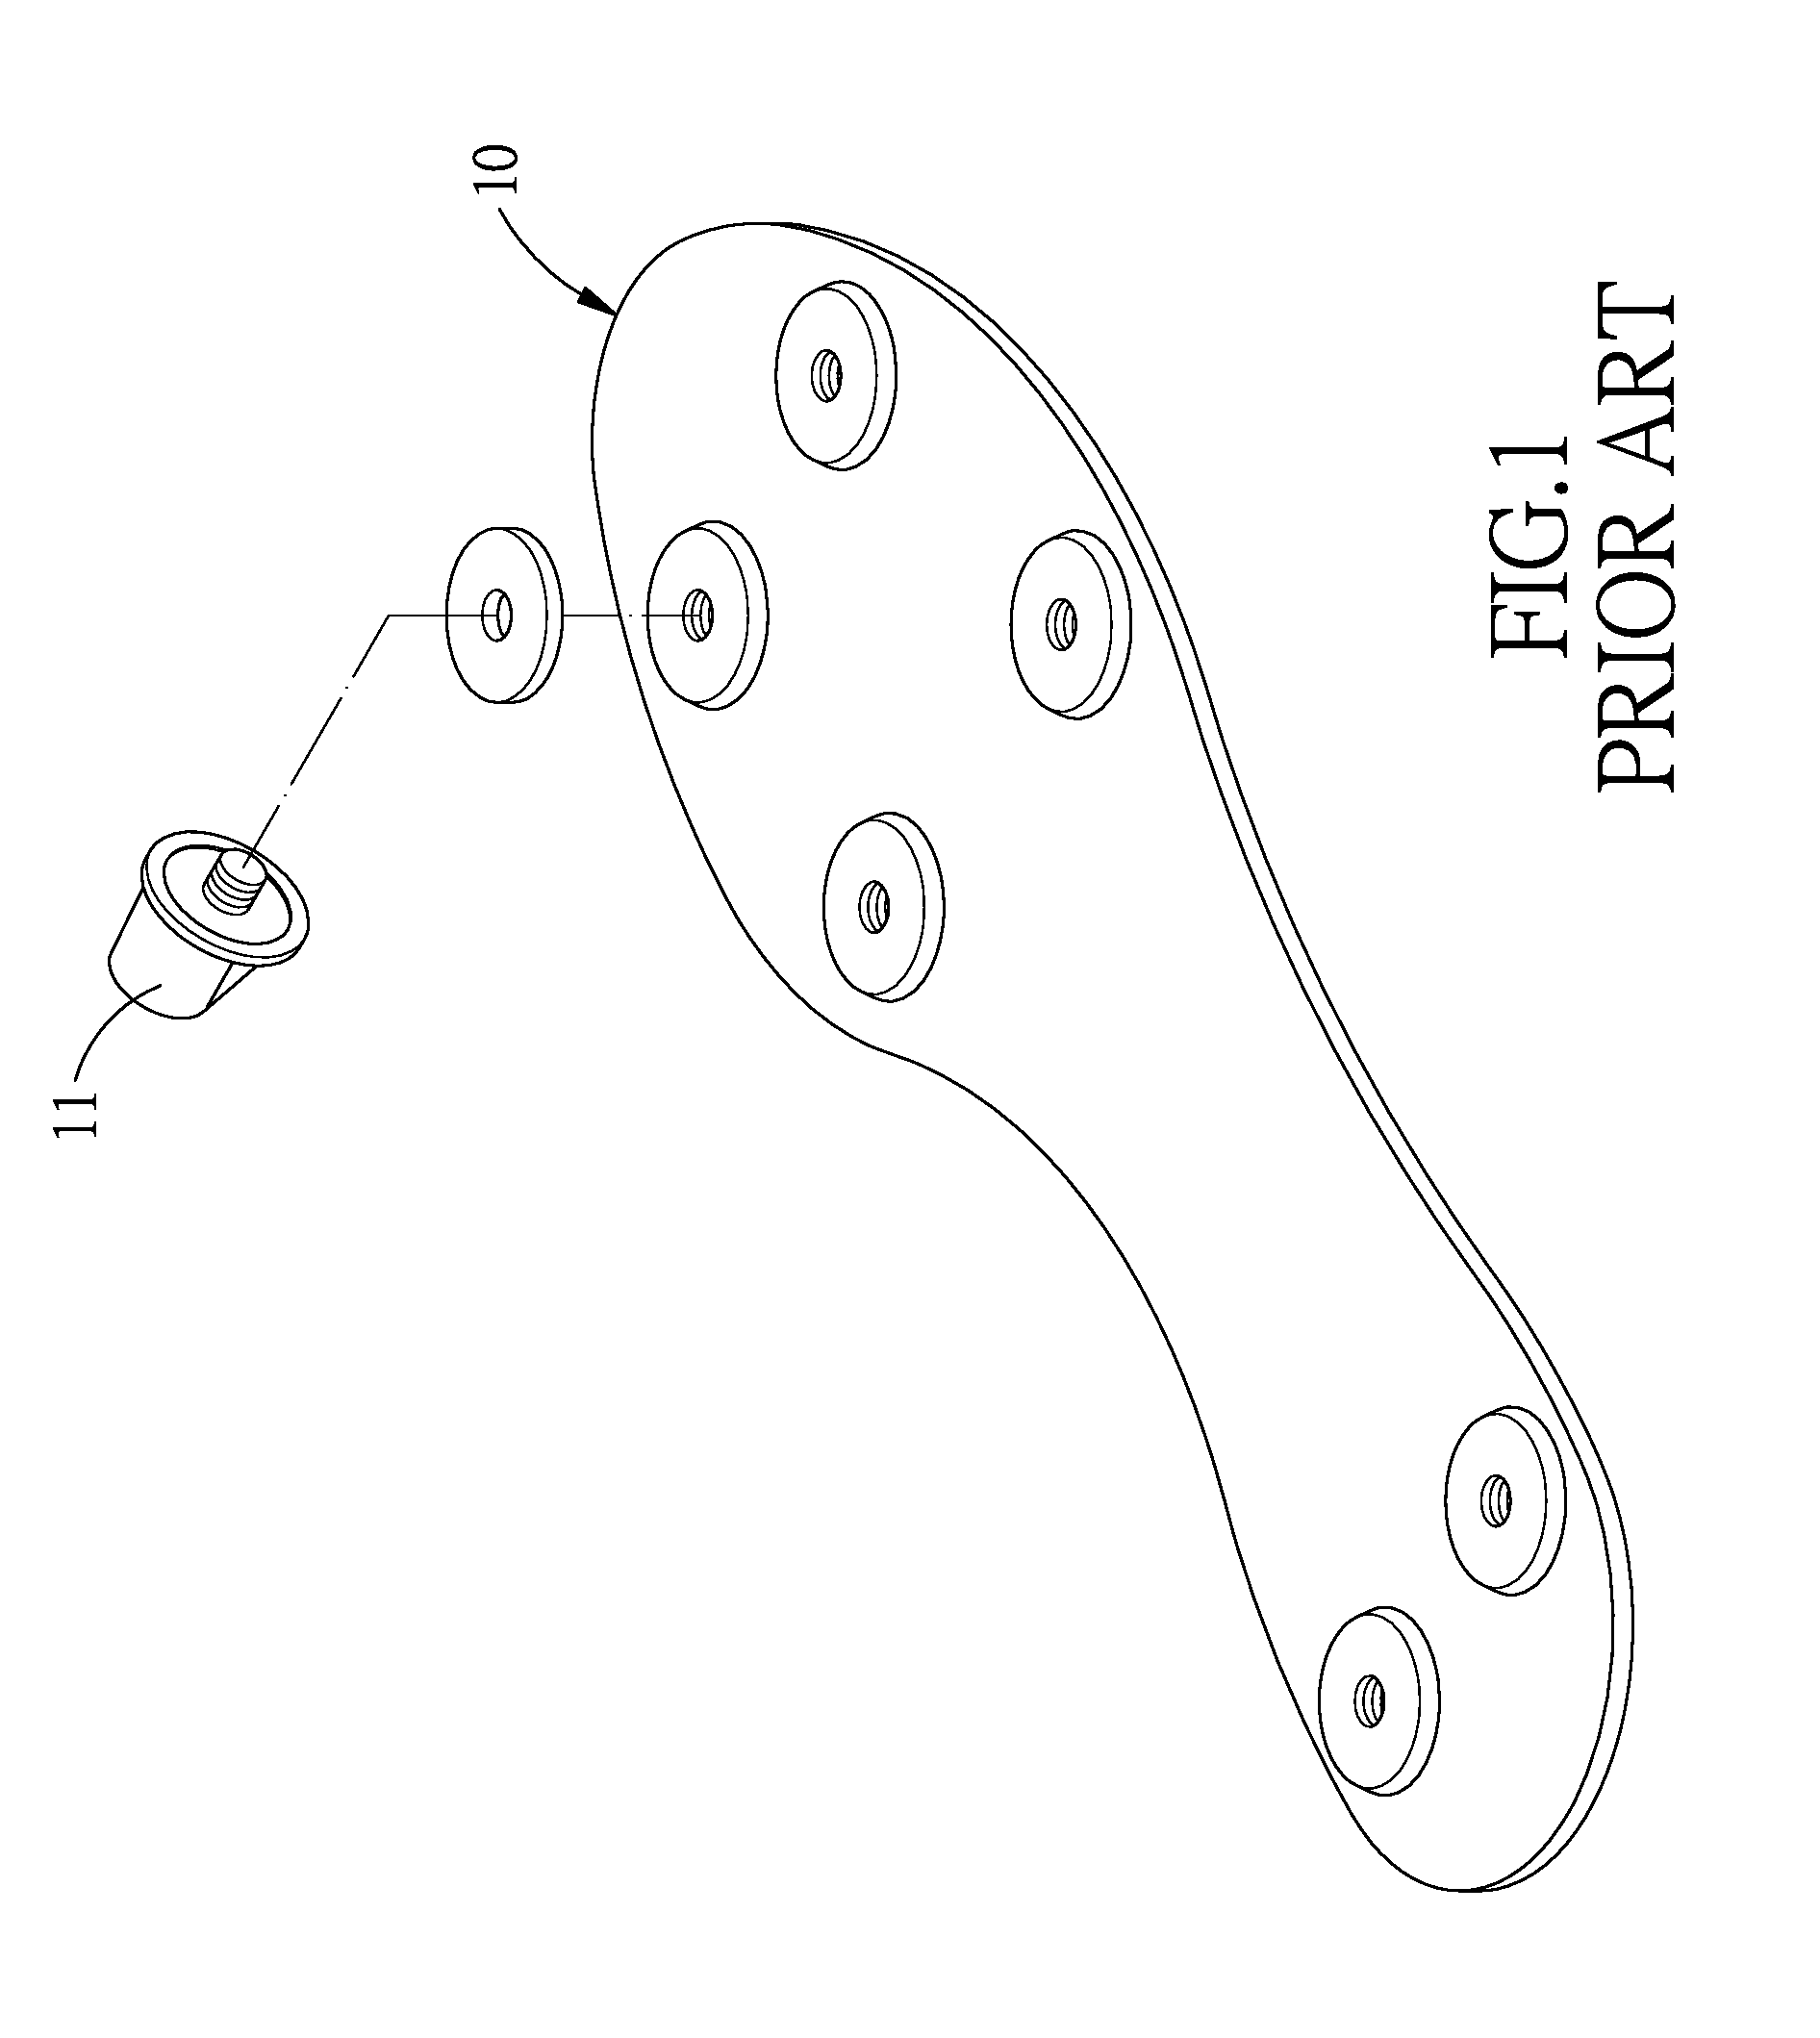 Method of forming sole and sole structure with shoe nail coupled thereto and sole structure with shoe nail